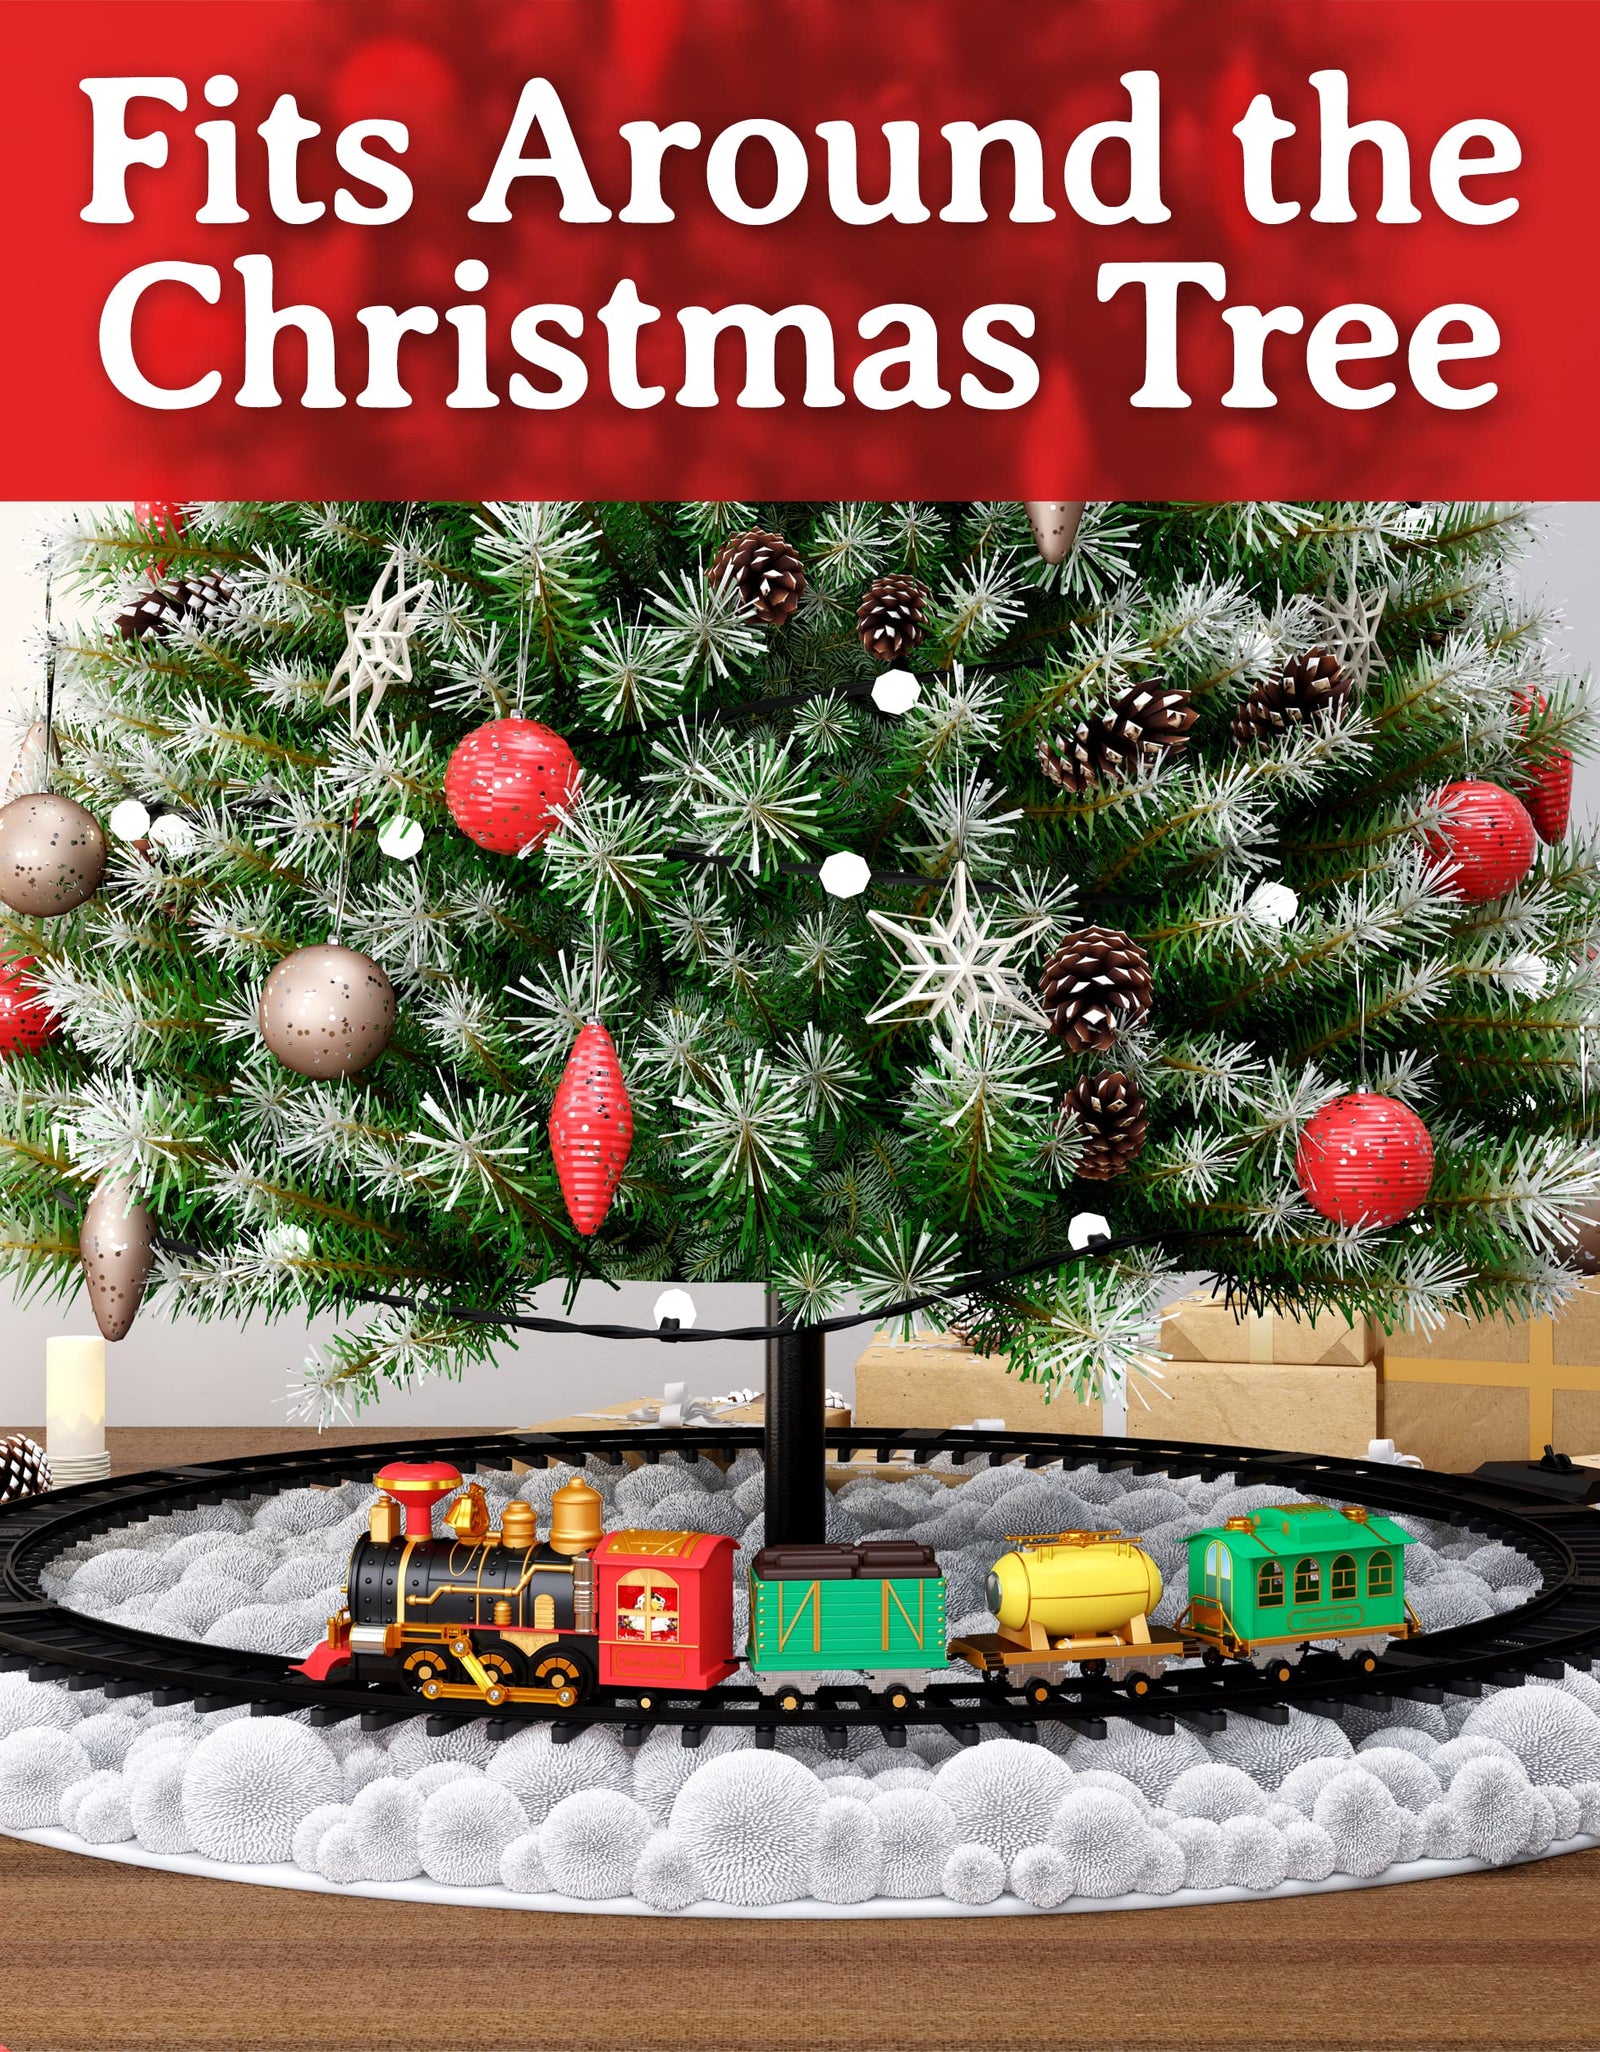 Christmas Steam Train Toy - Electric Train Set for Around Christmas Tree and Kids with Real Smoke, Music, & Lights Xmas Trains